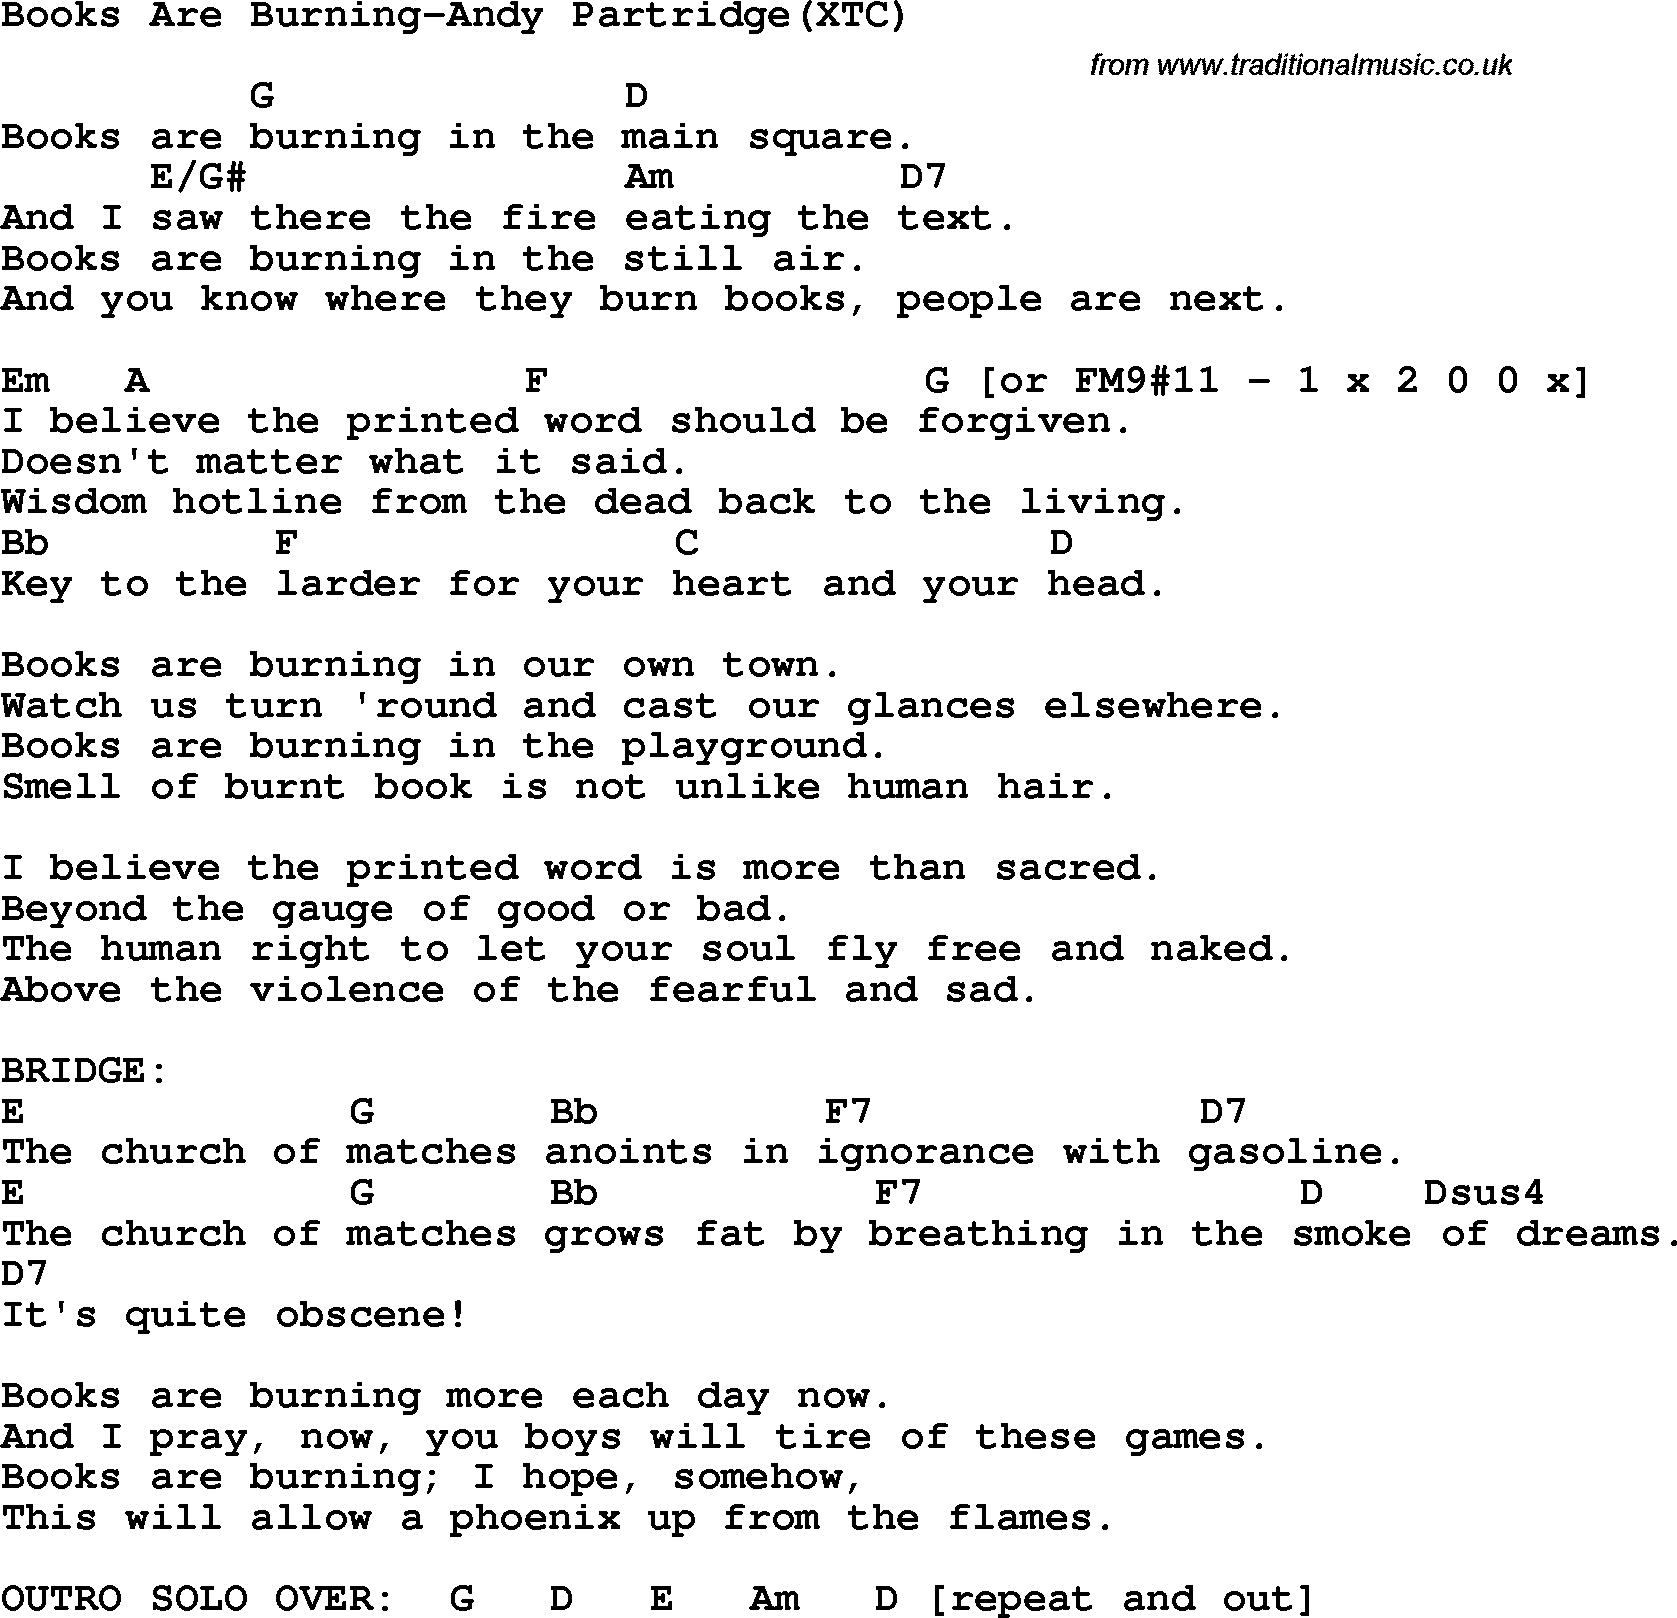 Protest Song Books Are Burning-Andy Partridge(Xtc) lyrics and chords